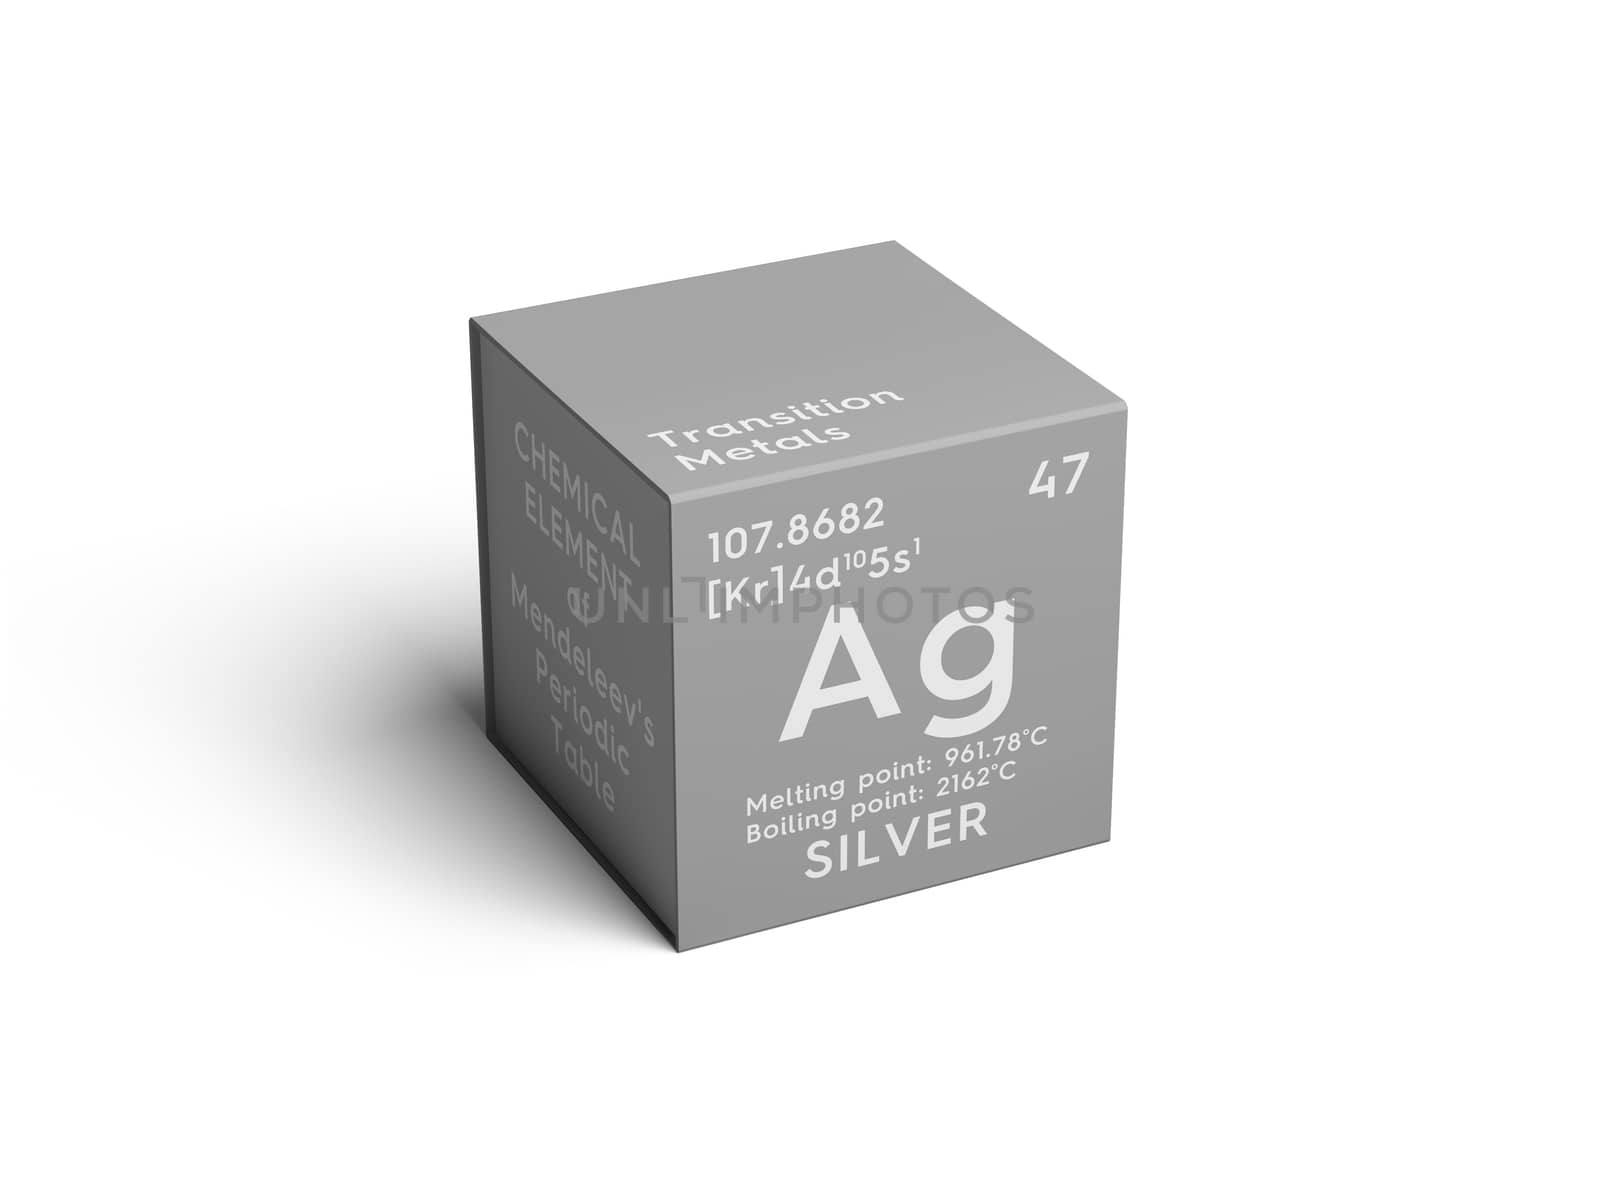 Silver. Transition metals. Chemical Element of Mendeleev's Periodic Table. Silver in square cube creative concept. 3D illustration.